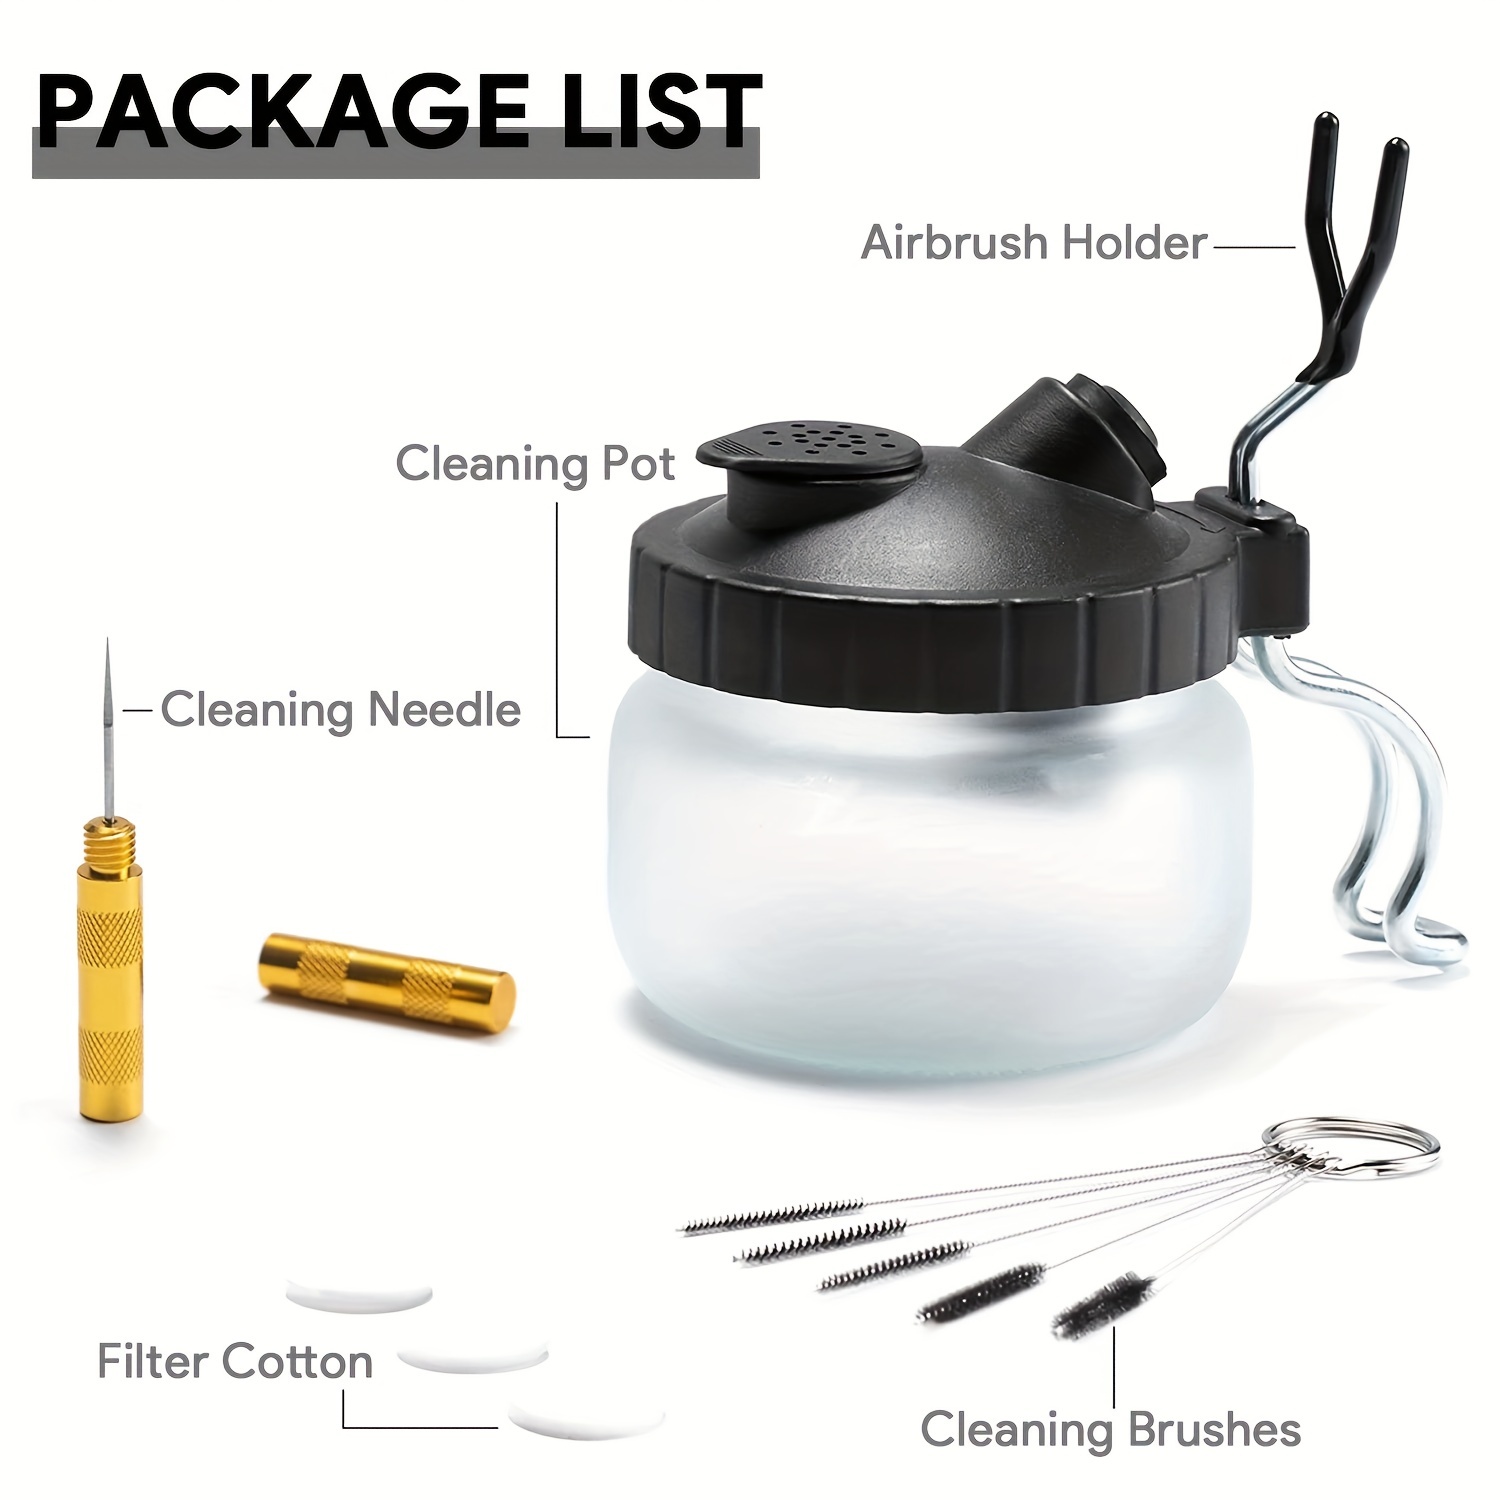 Airbrush Cleaning Pot, Airbrush Cleaning Tool Kit